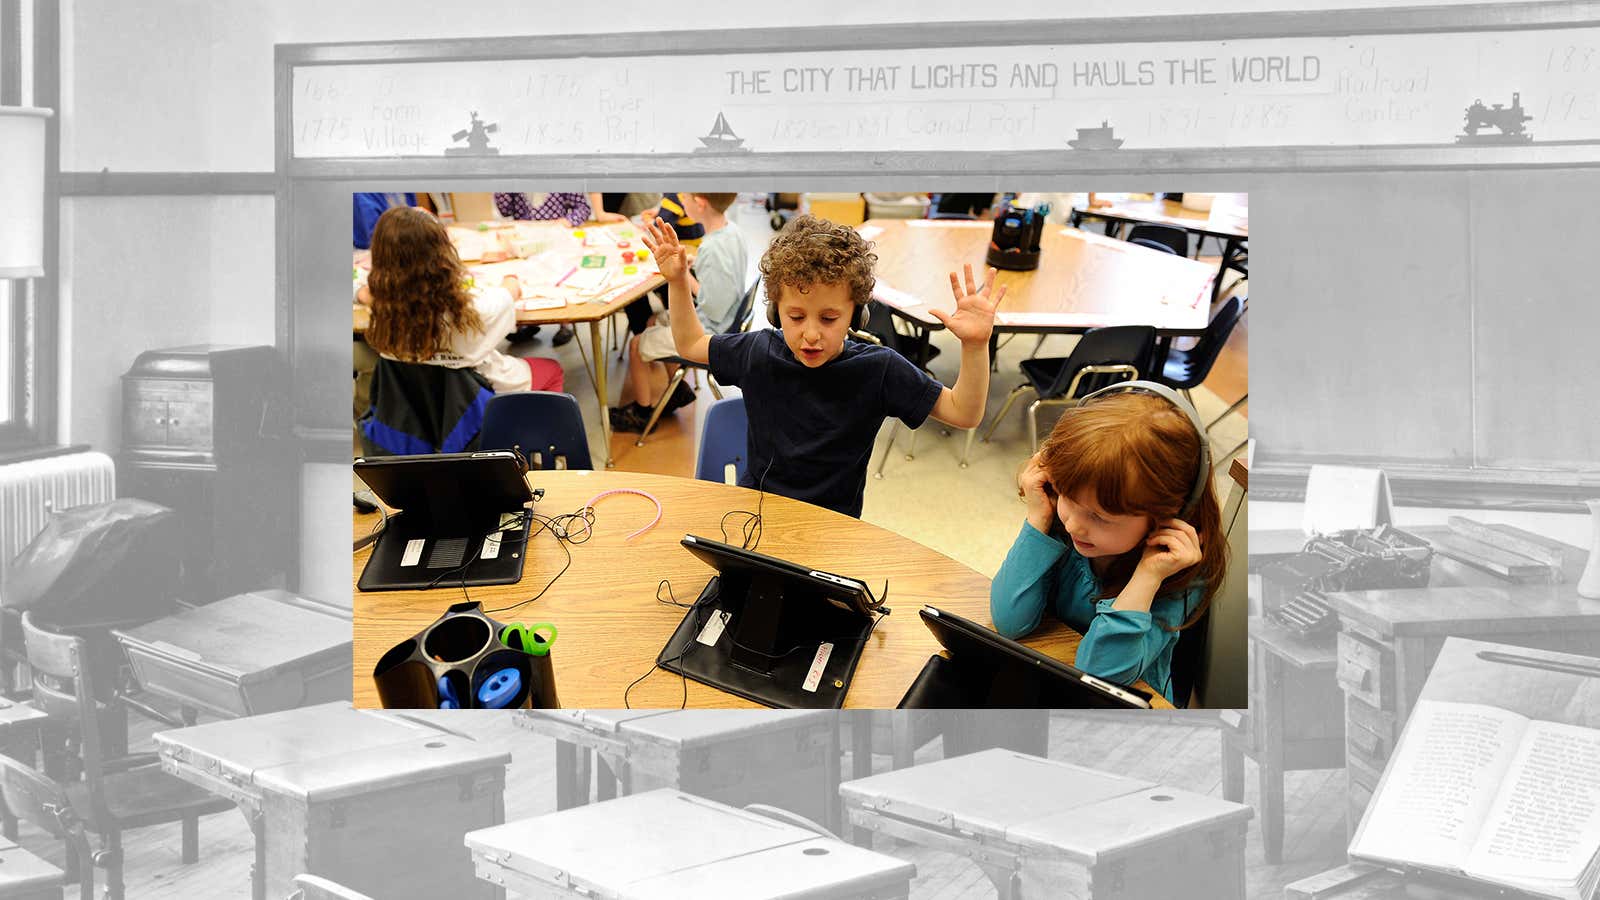 Tech accelerators can help bridge the gap between the classrooms of yore and the connected classrooms of the future.